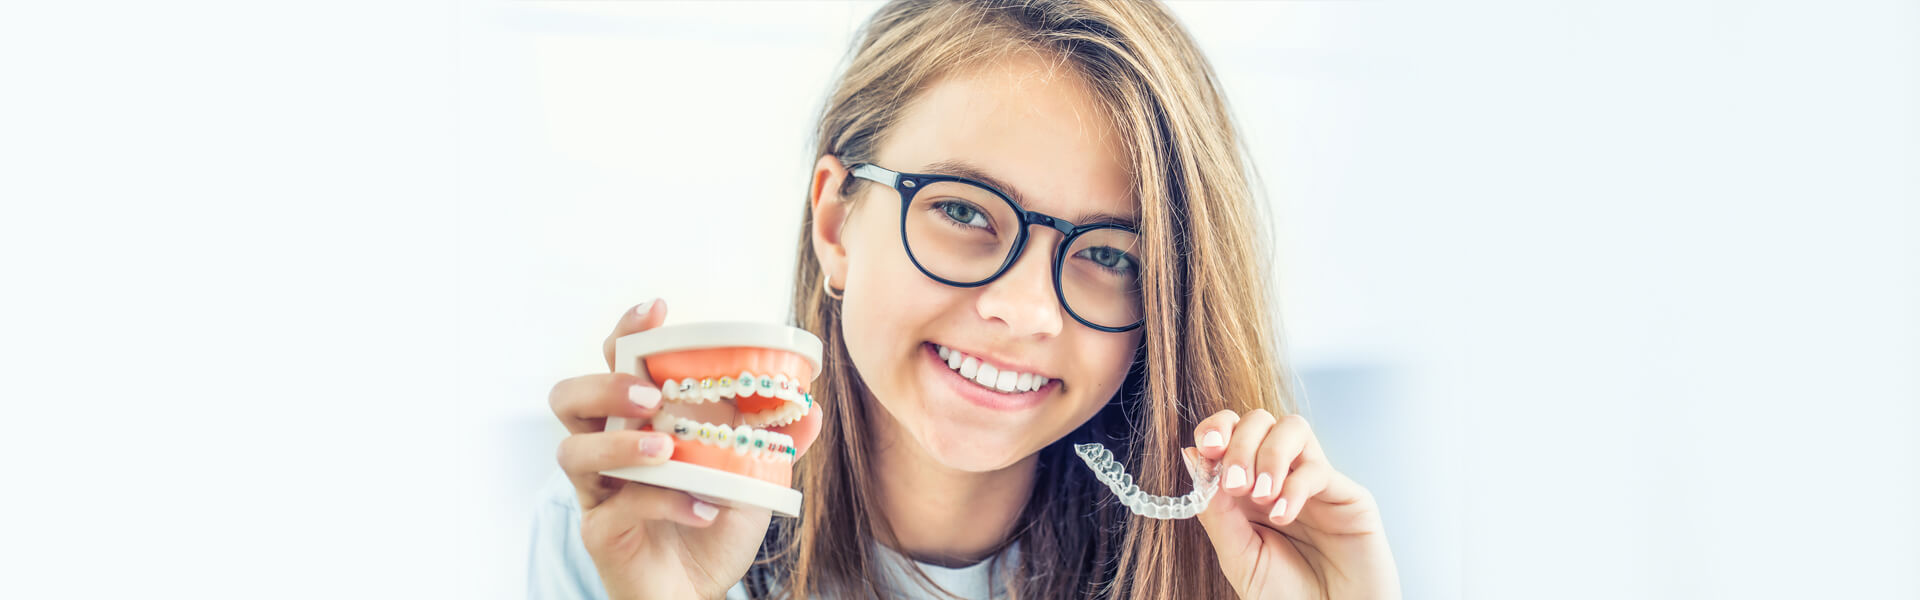 Important Things You Need to Know About Invisalign® Before Your Dental Visit